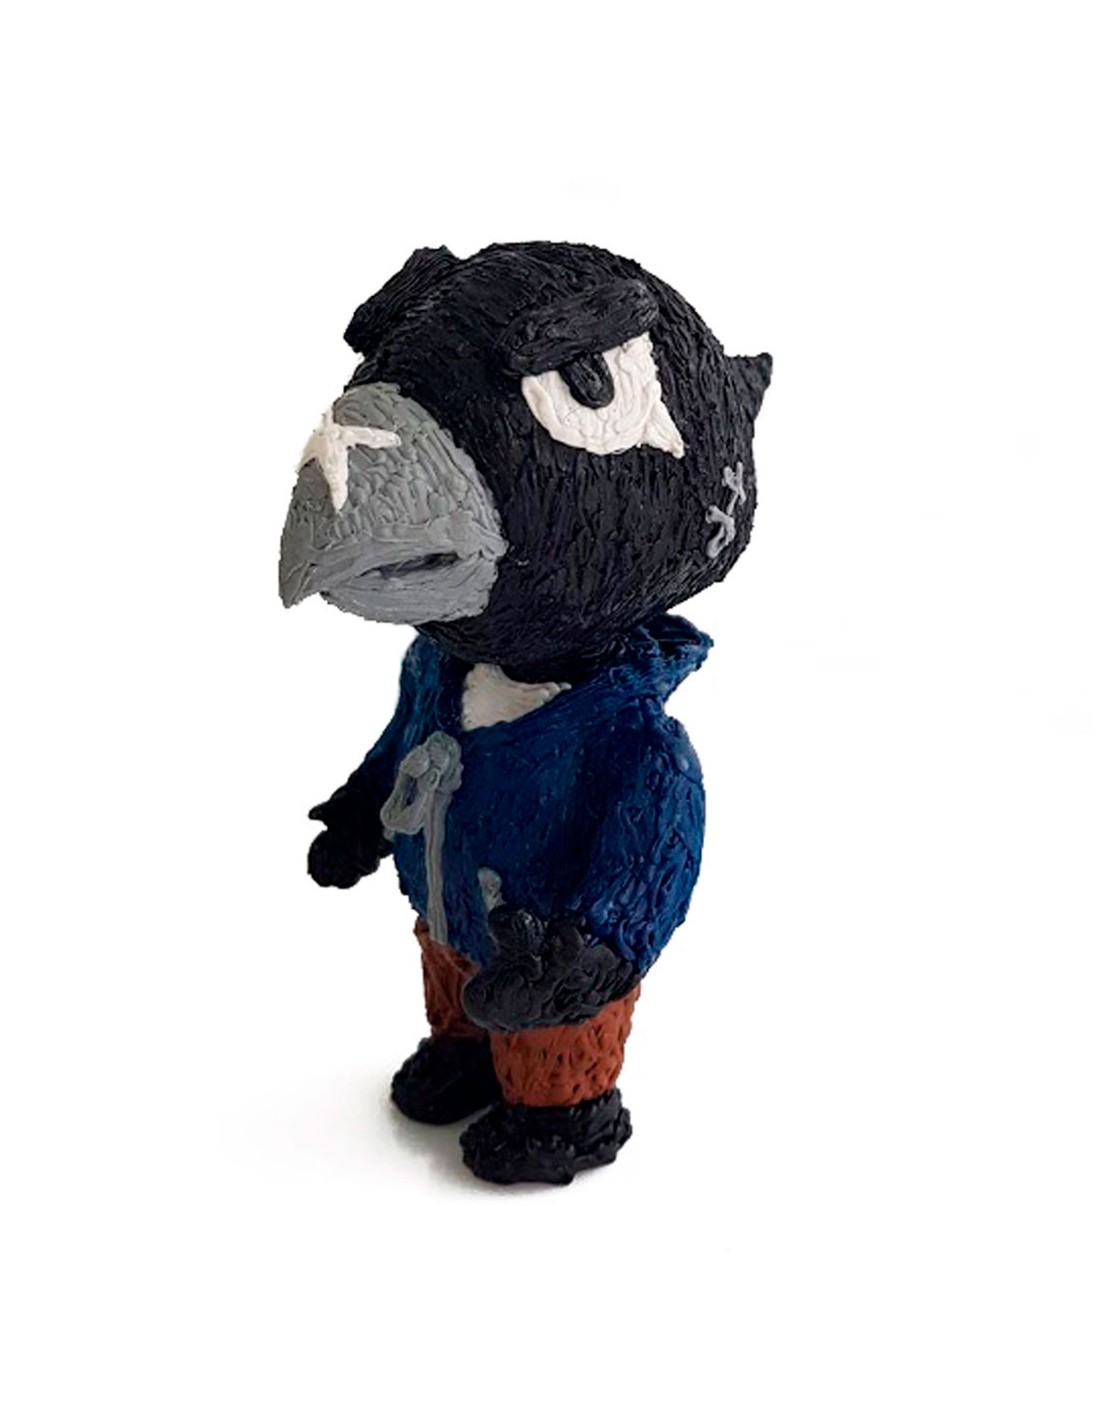 Raven From Brawl Stars Free Template For A 3d Pen - brawl stars crow template